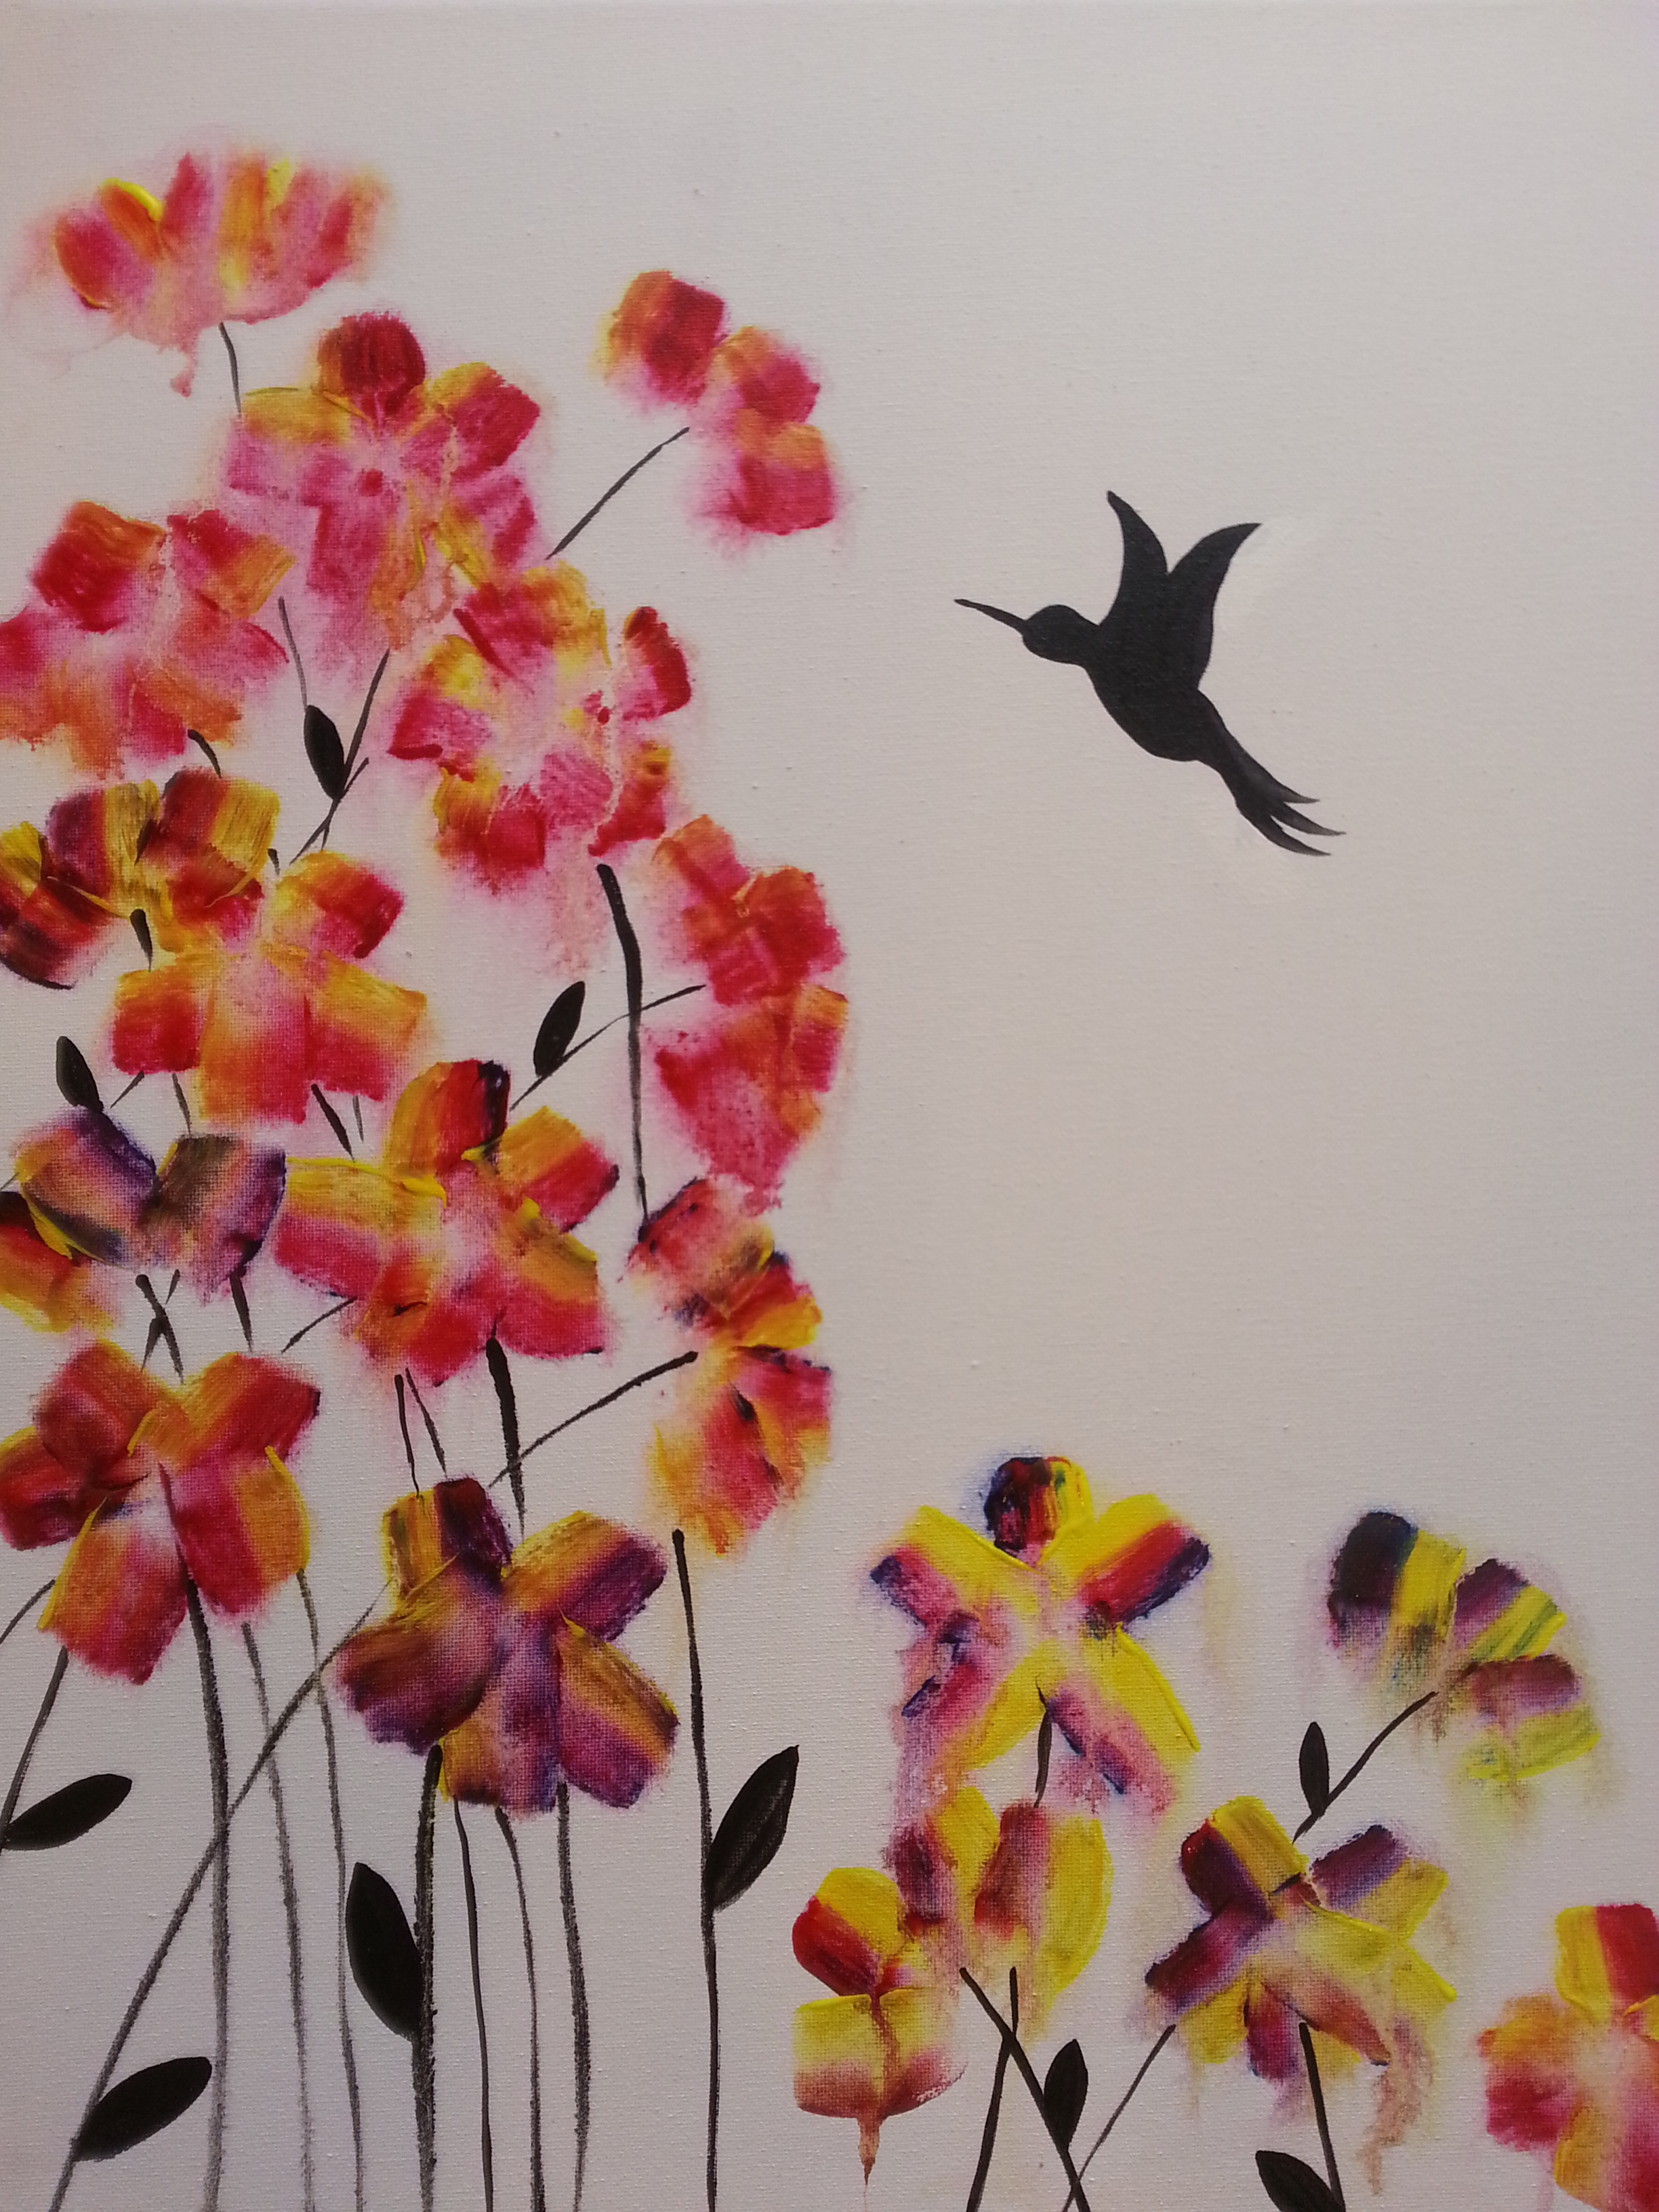 A Water Flowers and Hummingbird paint nite project by Yaymaker